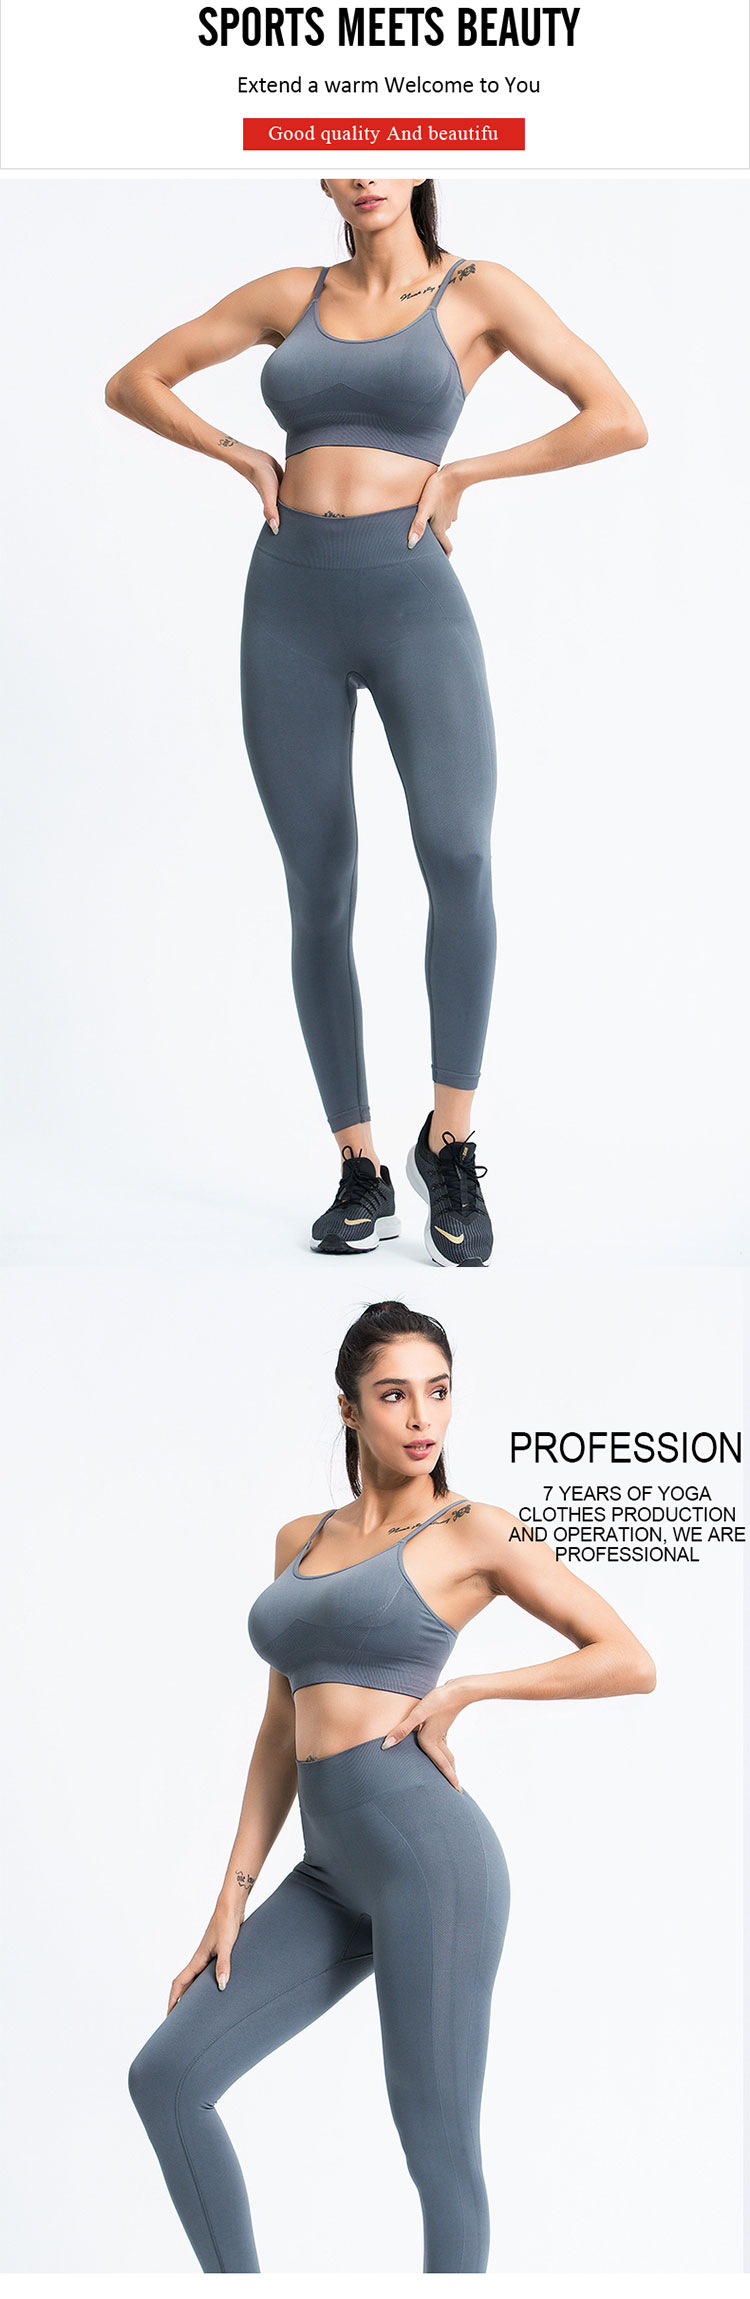 With-the-return-of-minimalism,-sheer-yoga-pants-are-turning-into-low-key-styles.-